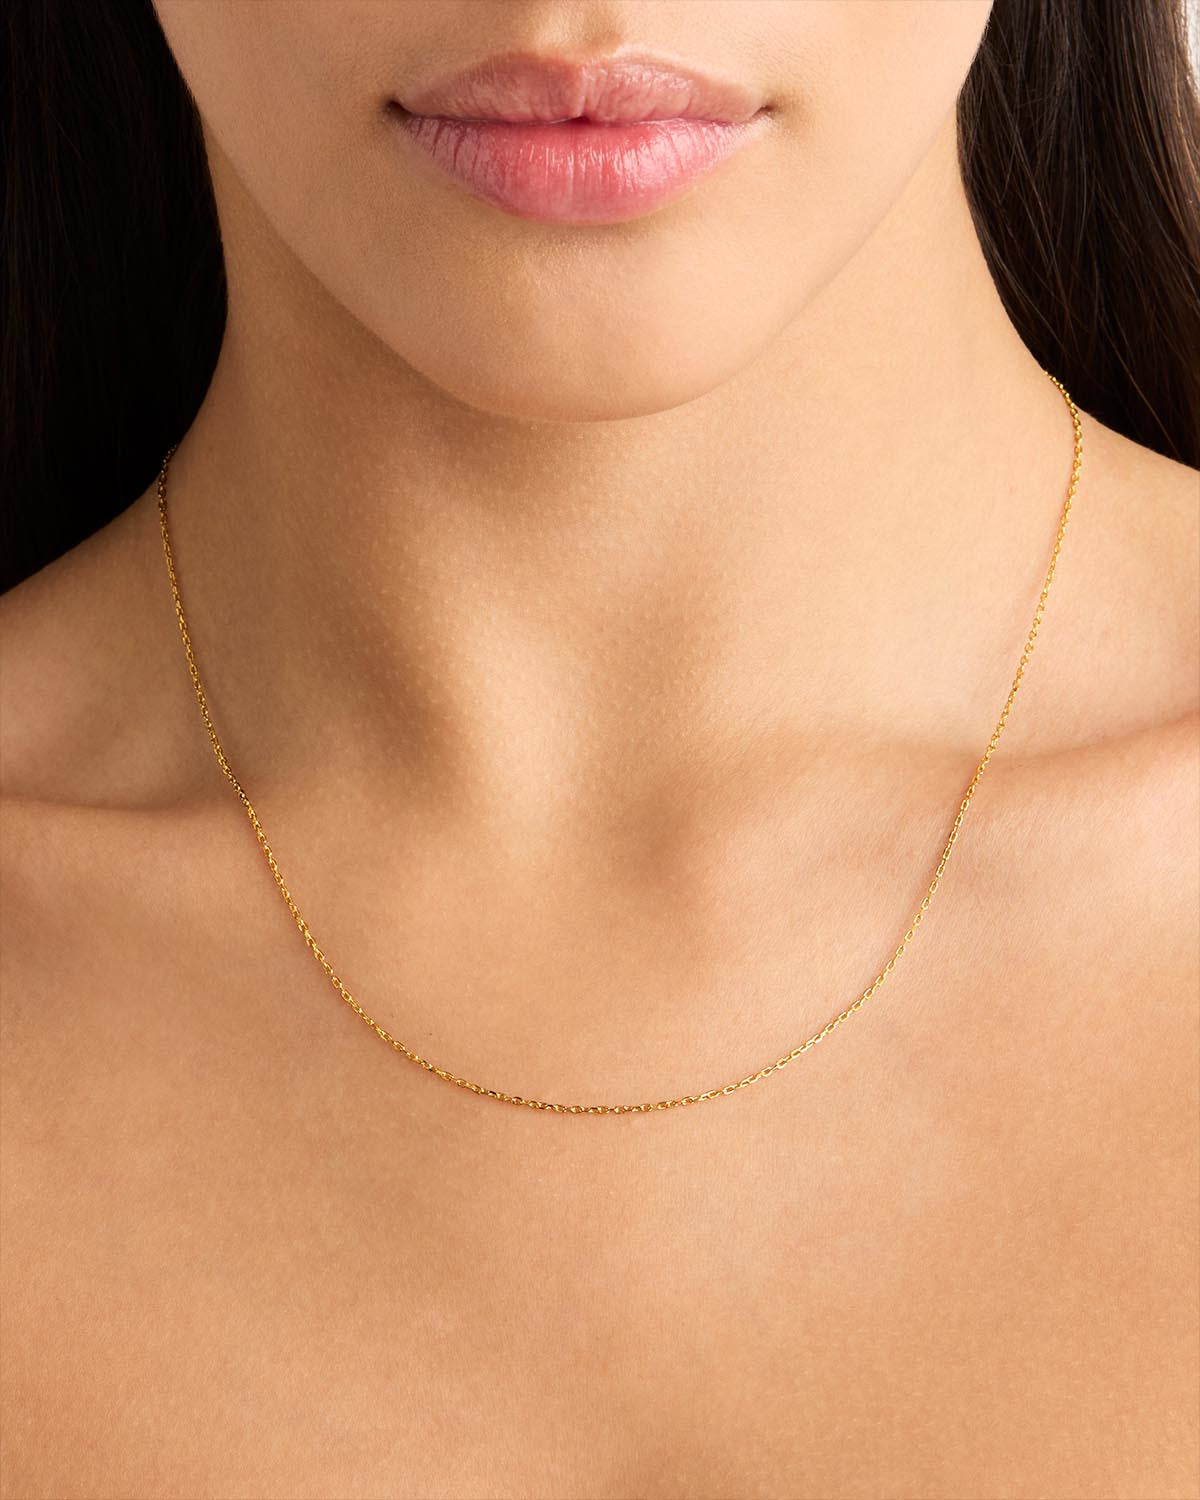 Paperclip Chain 14k Gold, Semi-solid, 3.9mm Links